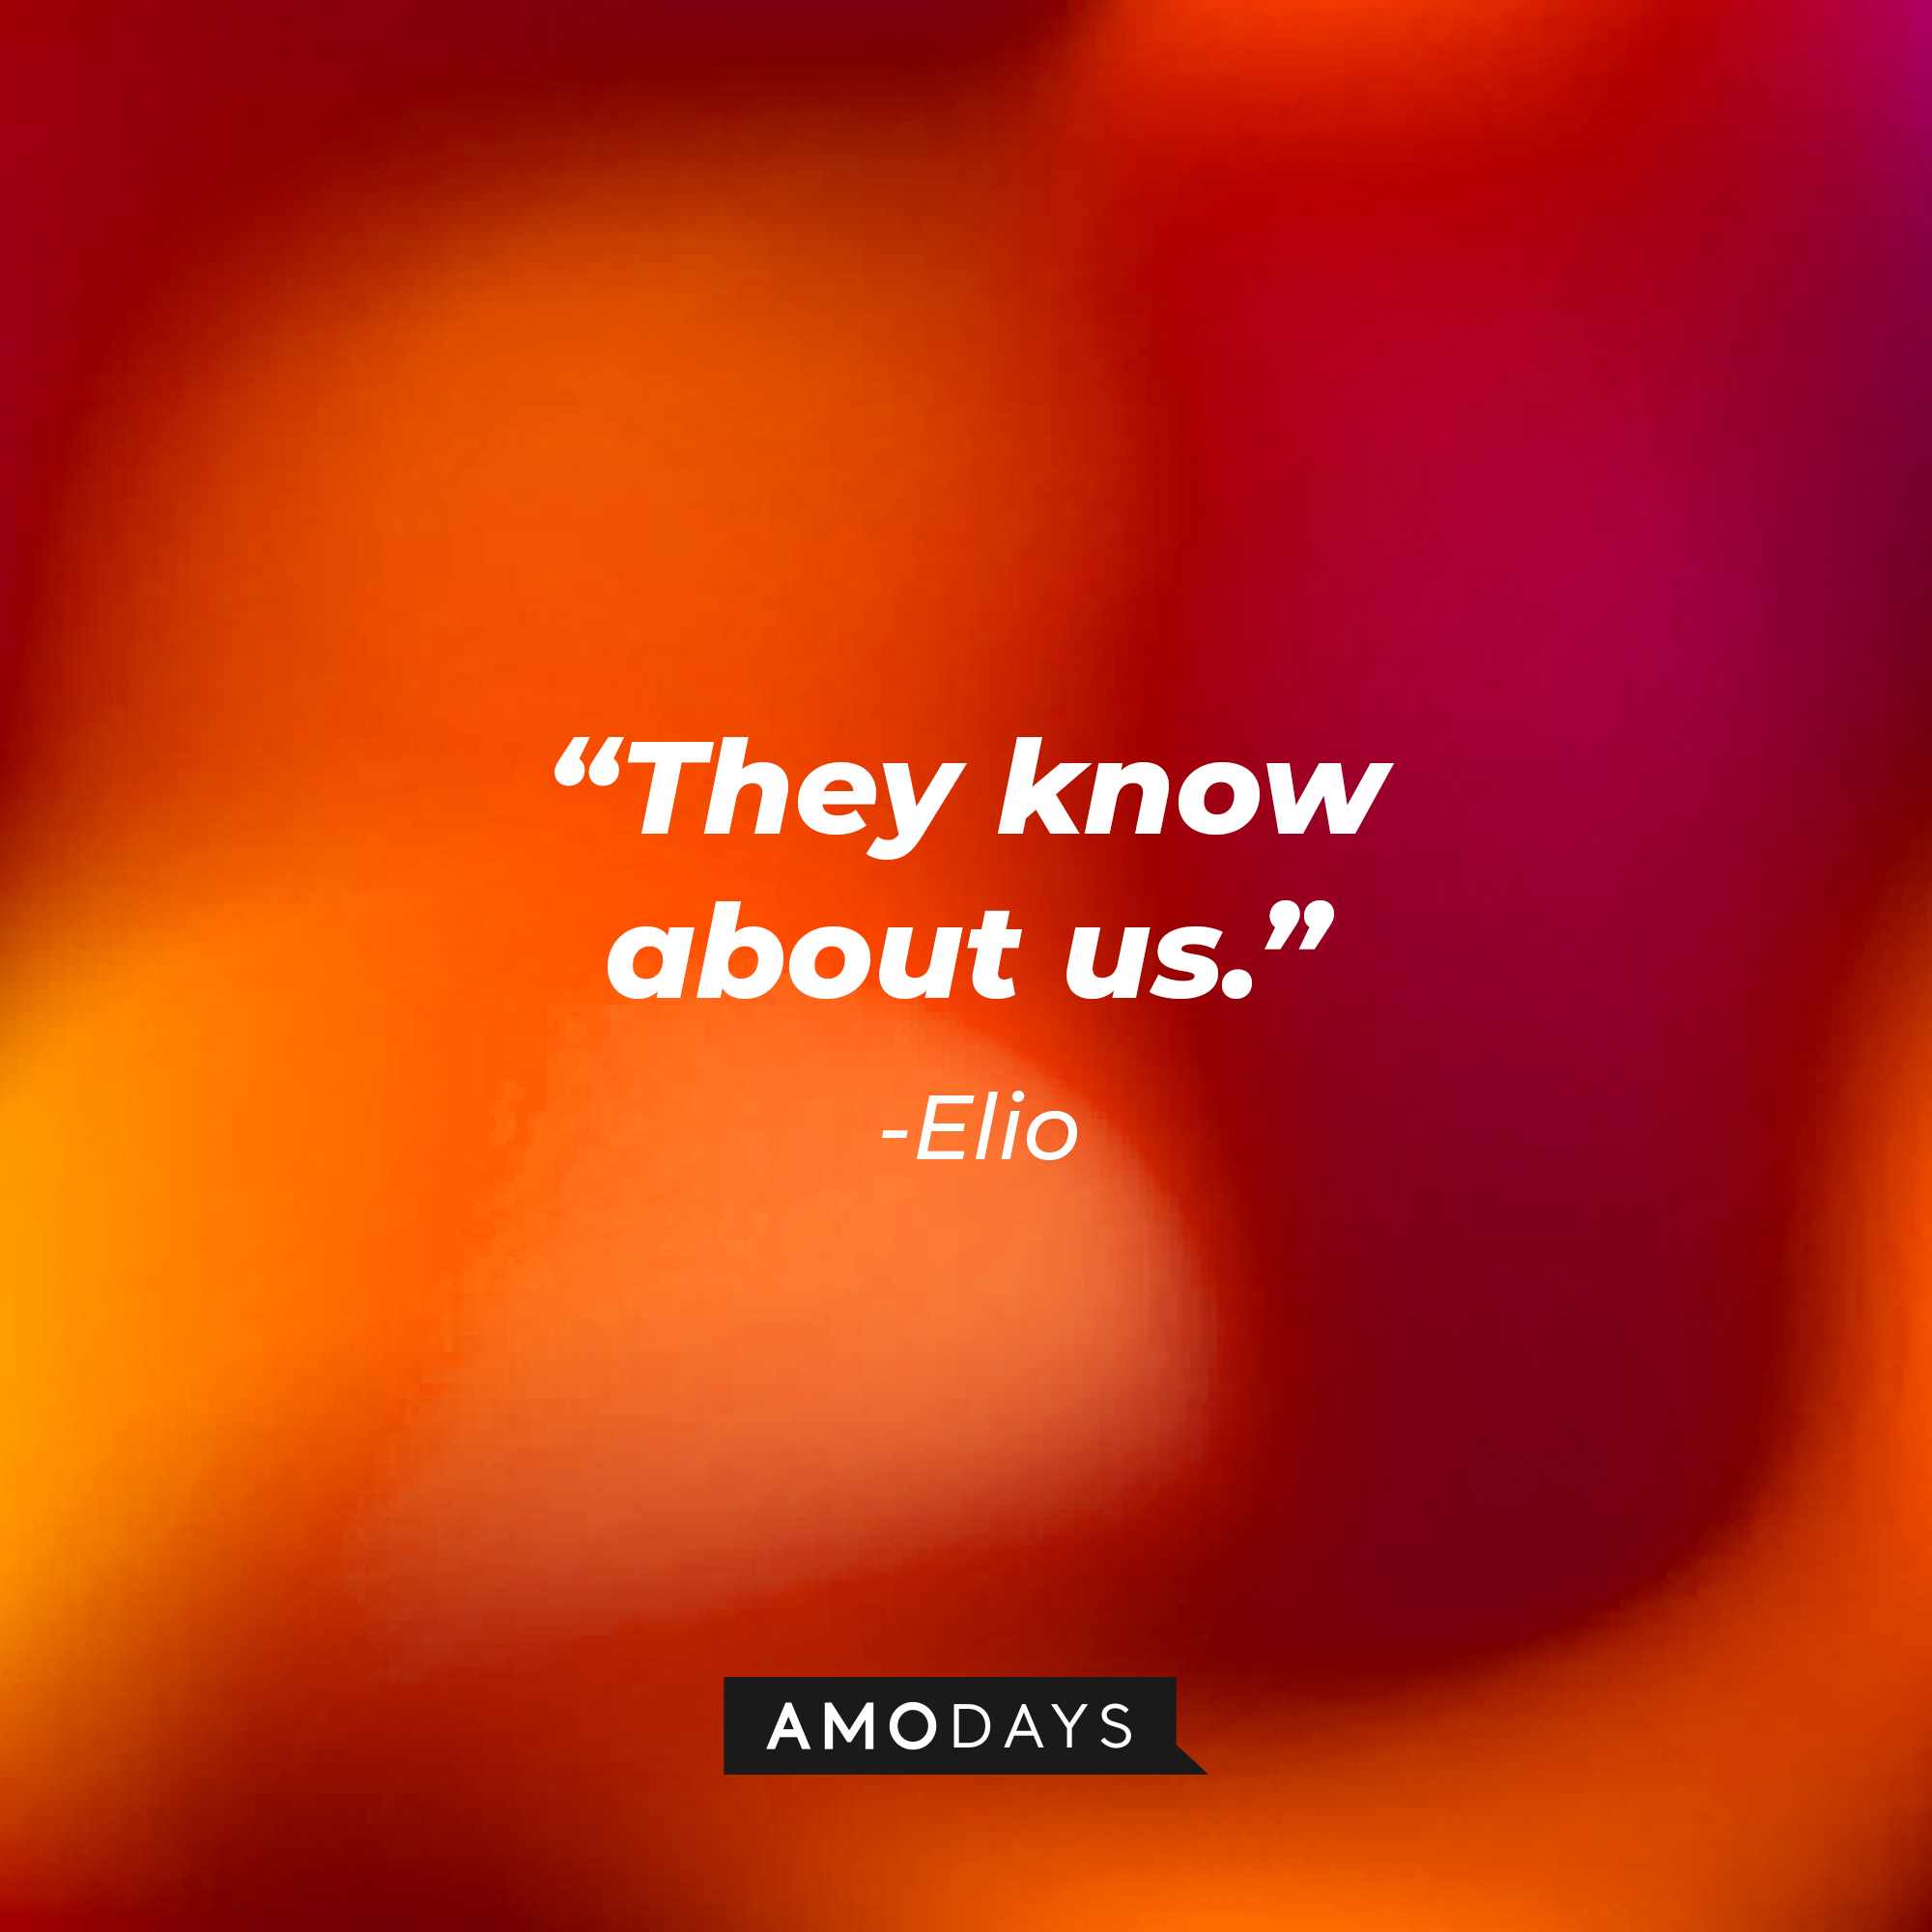 Elio's quote: "They know about us." | Source: AmoDays